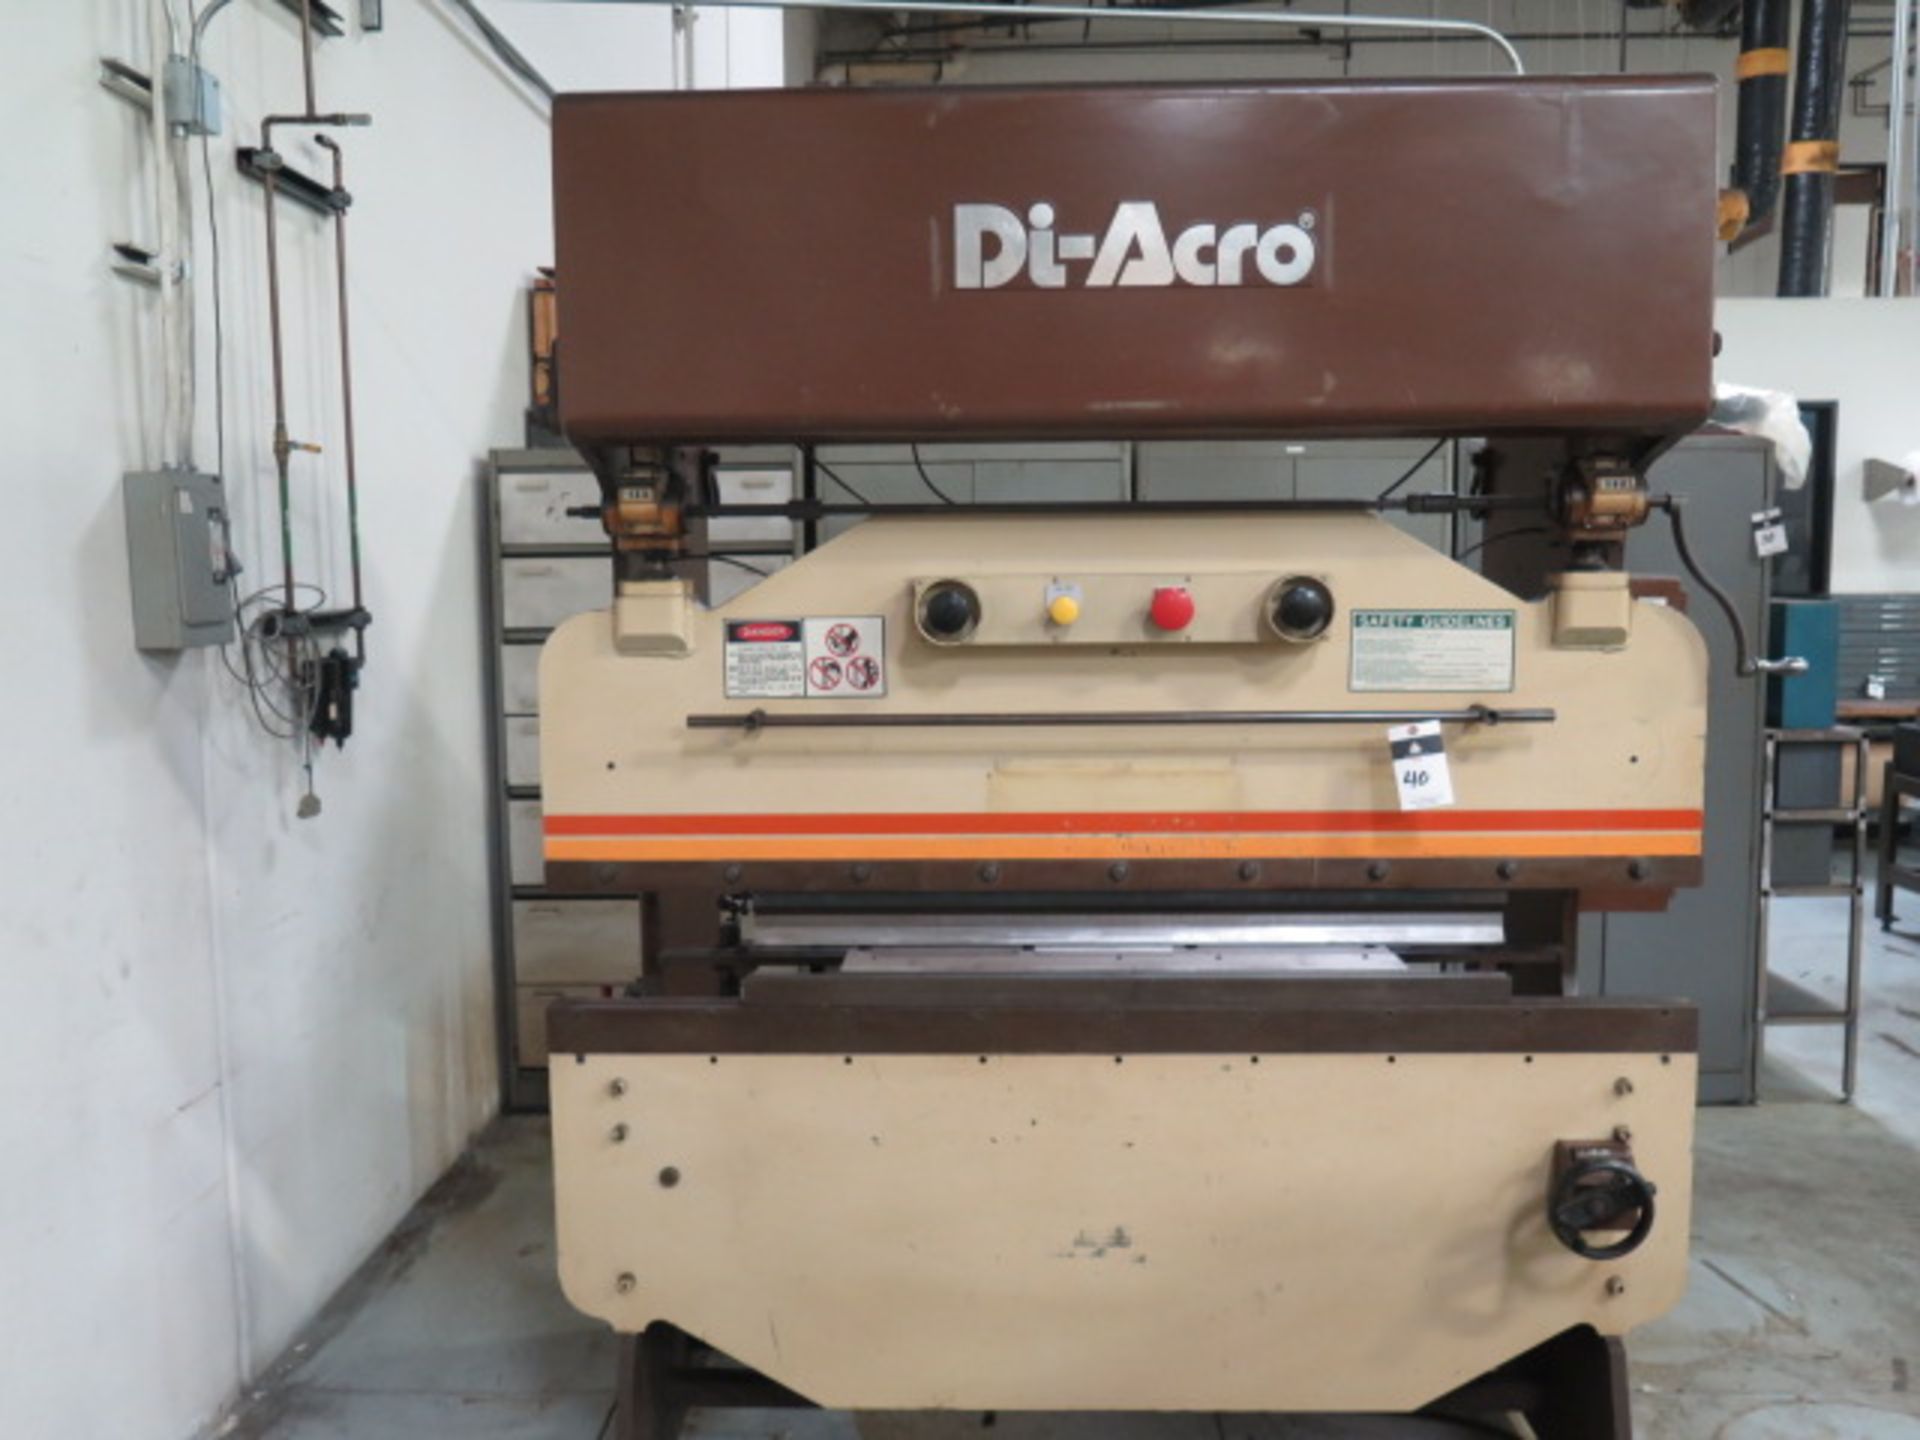 DiAcro 4-7272” Press Brake w/ Dial Back Gage, 72” Length, This Item is Sold AS IS and NO Warranty.